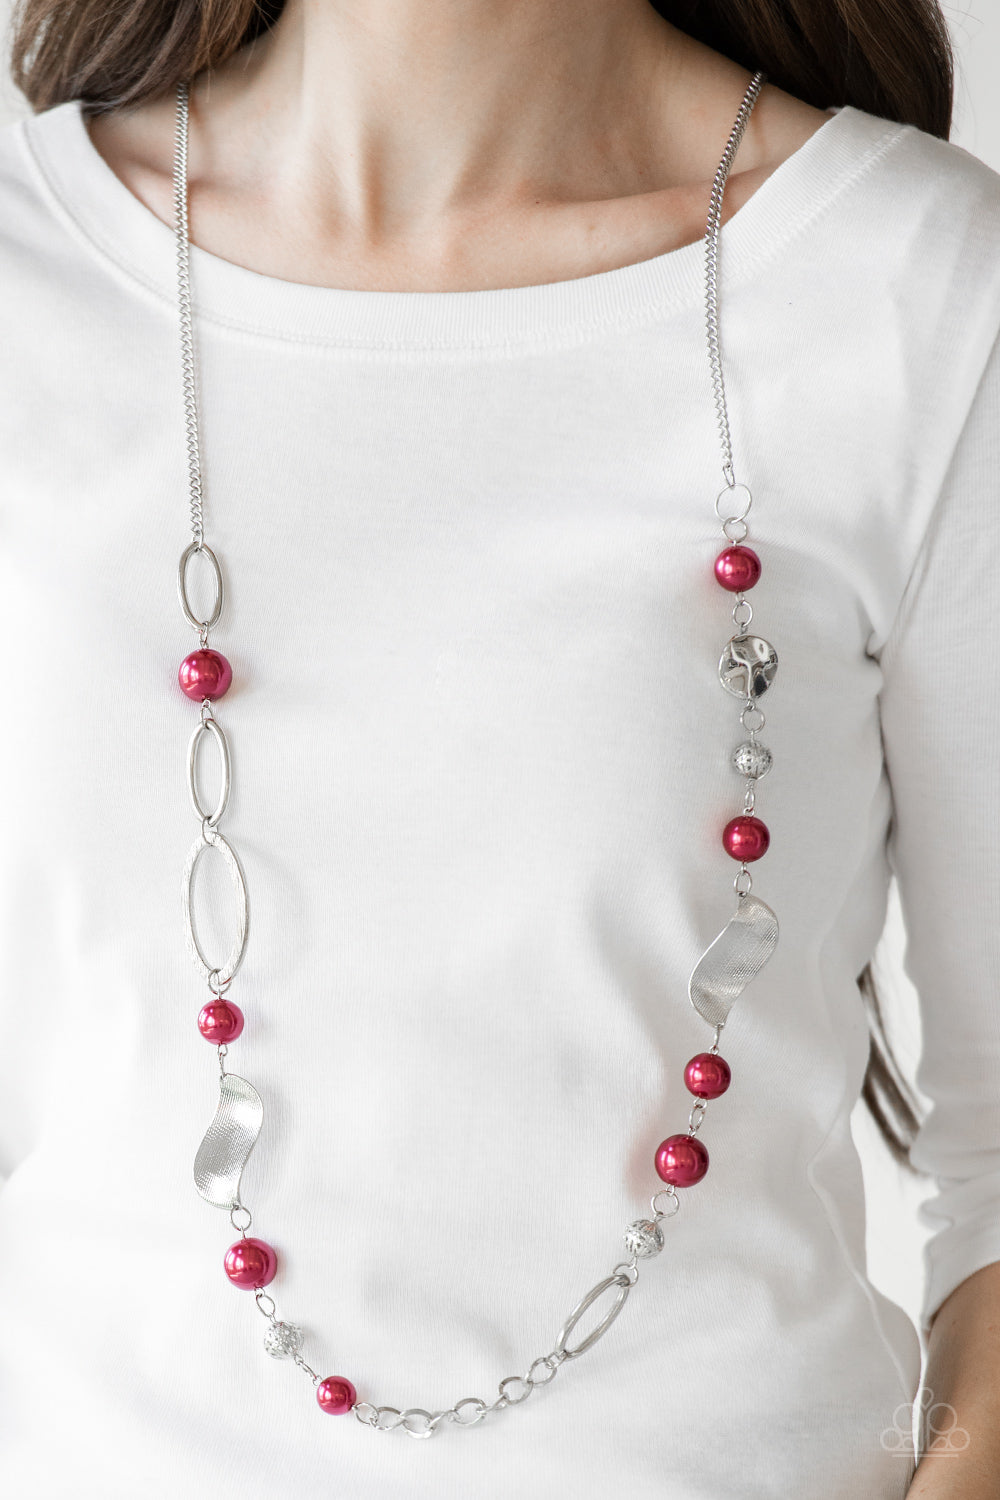 Paparazzi All About Me - Red Pearls - Silver Beads - Necklace & Earrings - $5 Jewelry with Ashley Swint